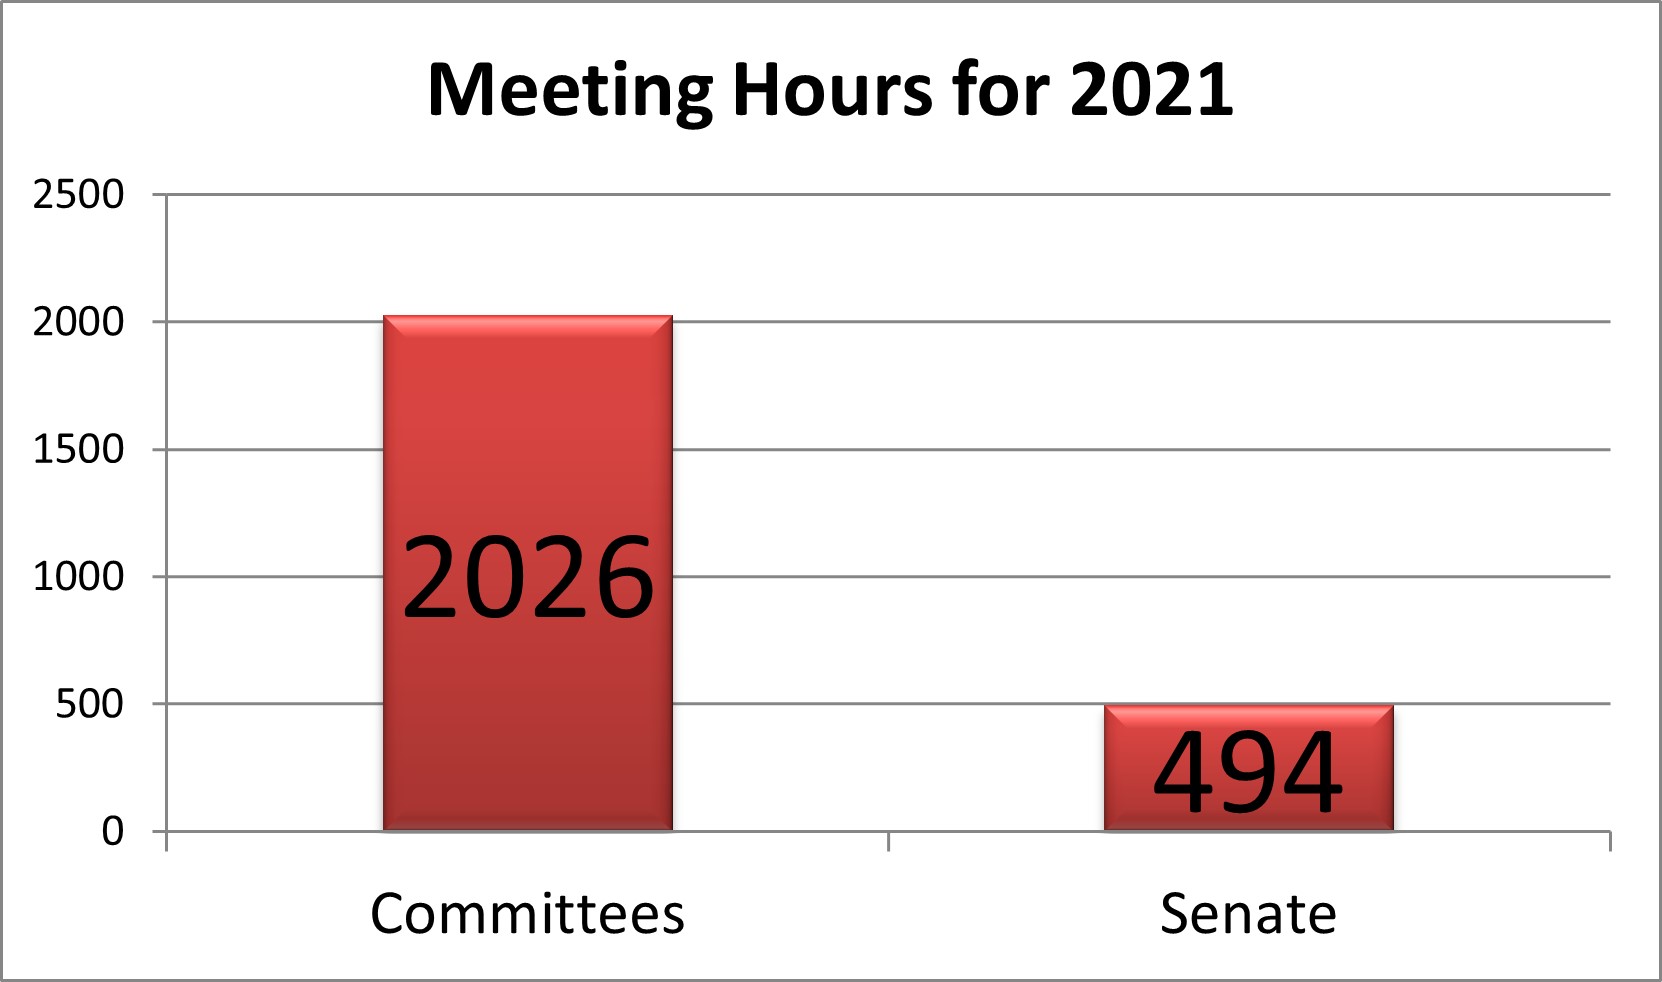 Chart showing meeting hours for the Senate in 2021. The Senate chamber met for 494 hours and Senate committees for 2026 hours.